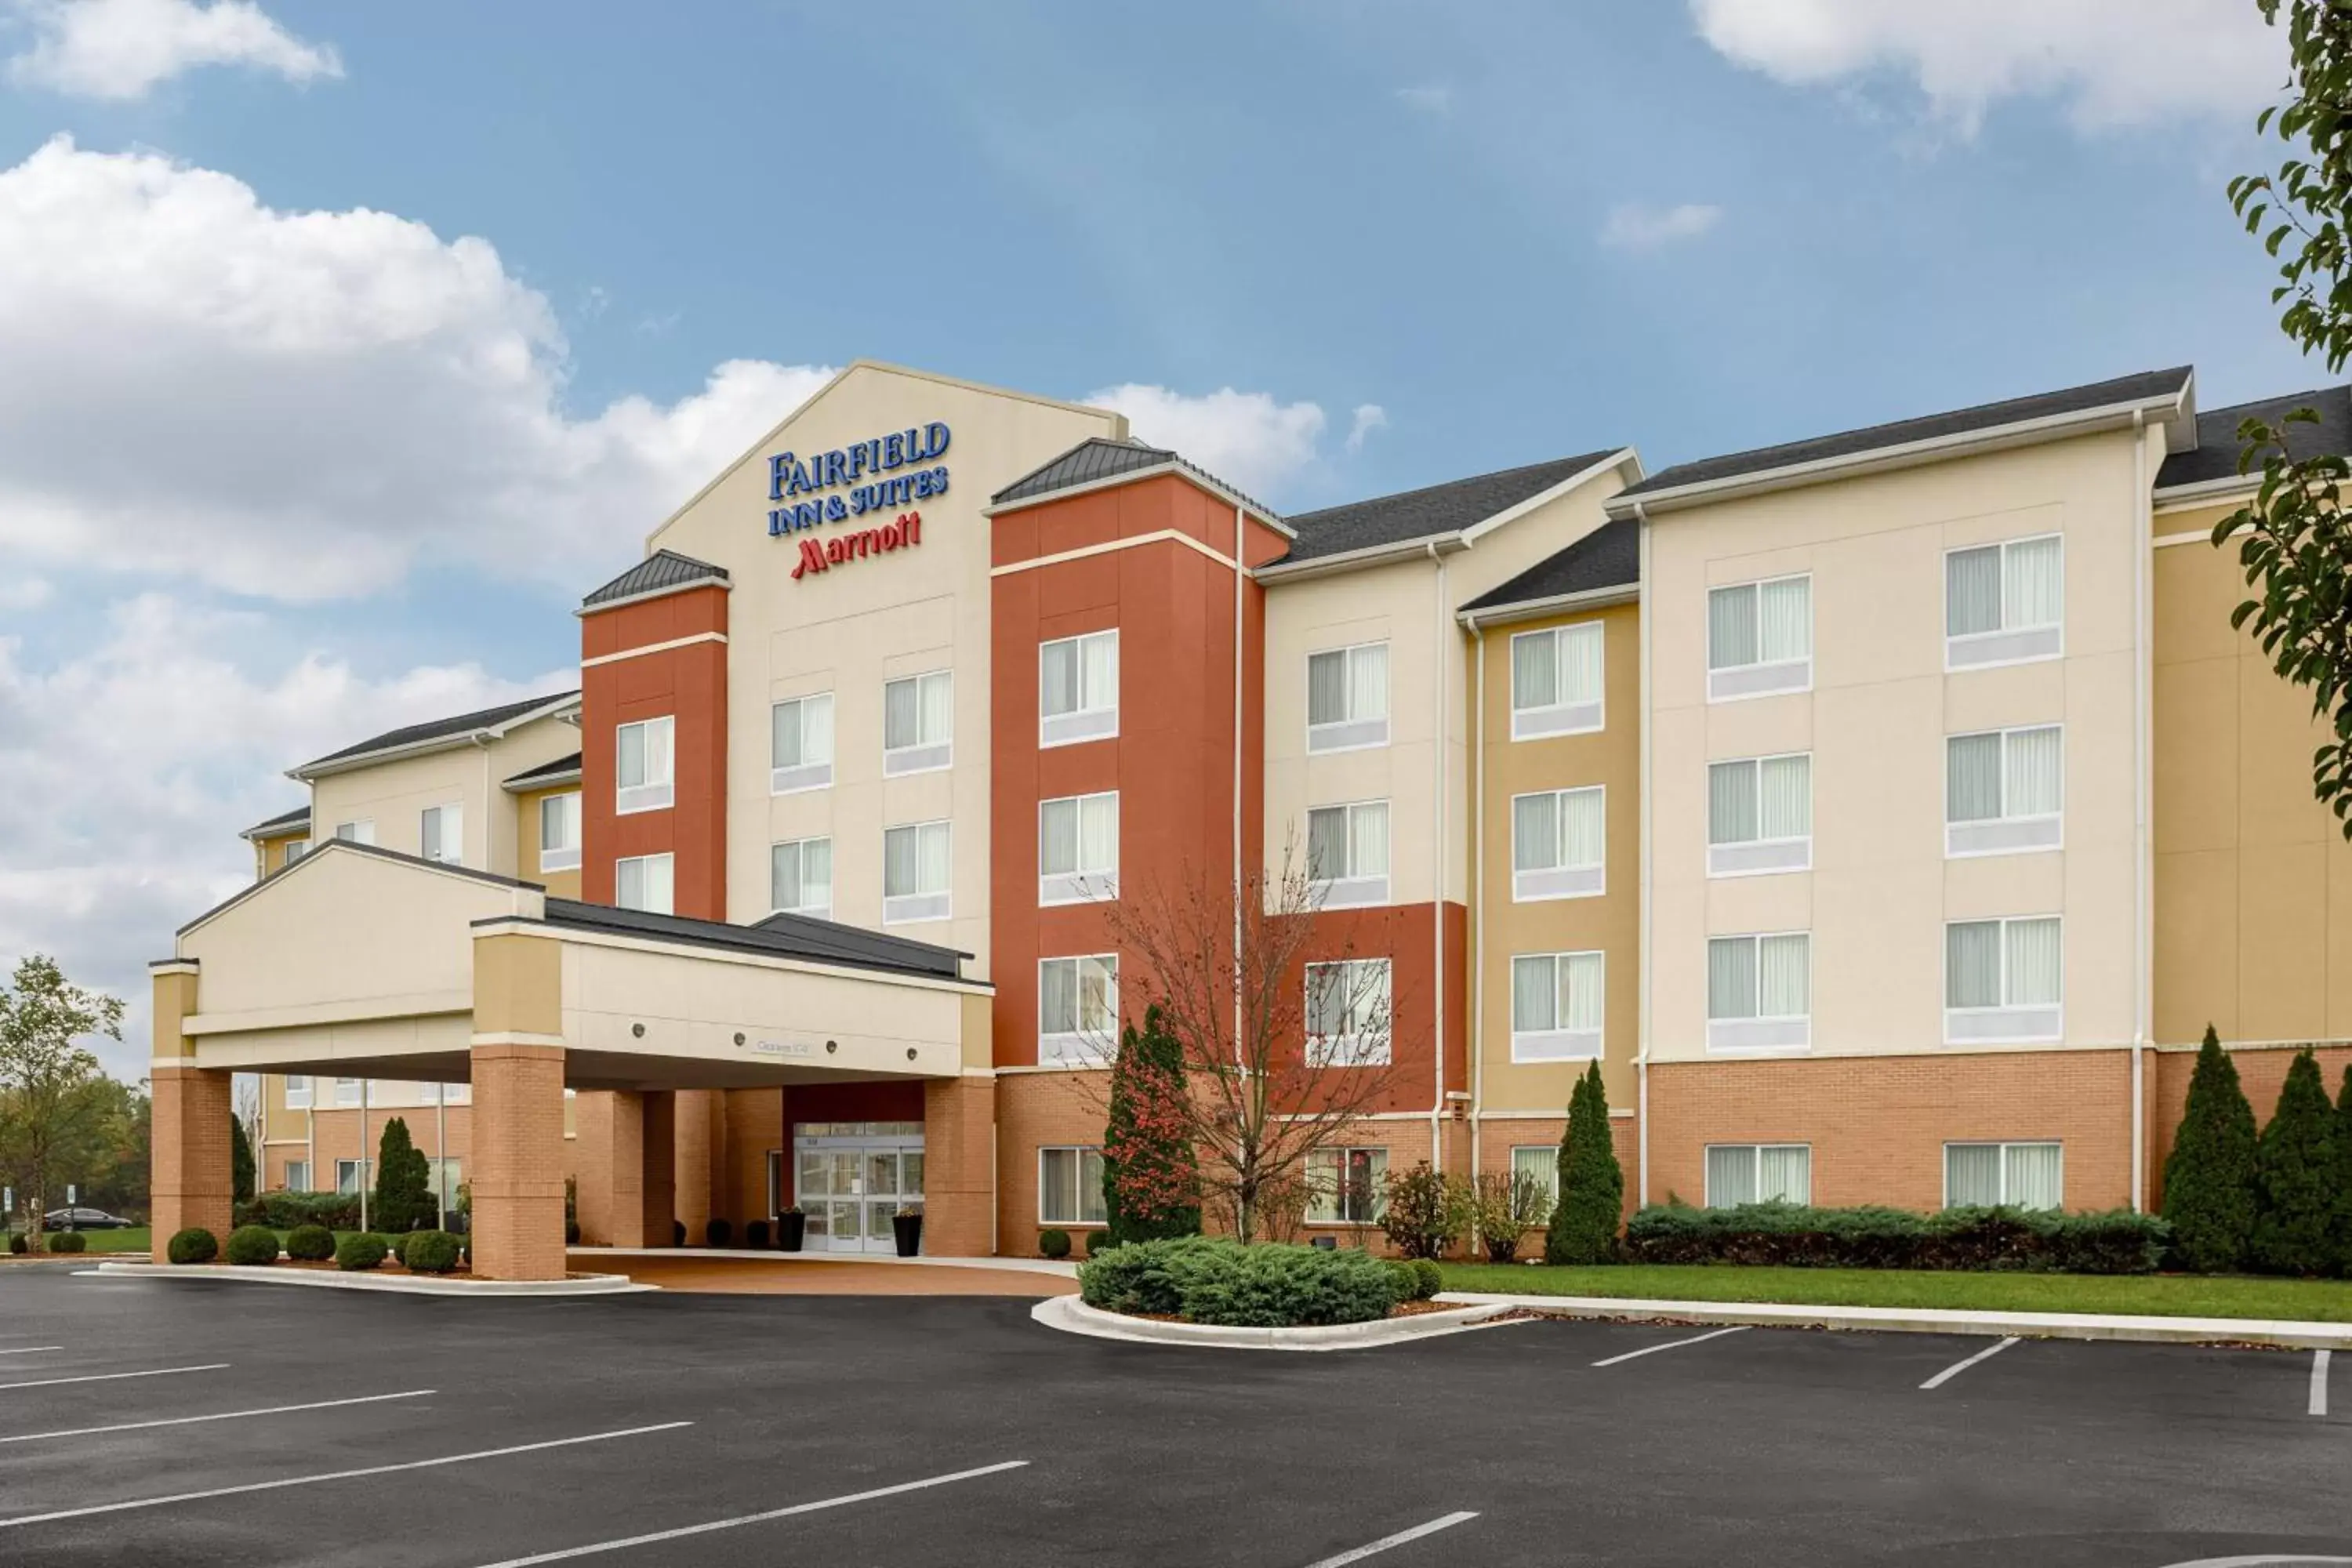 Property Building in Fairfield Inn and Suites Paducah